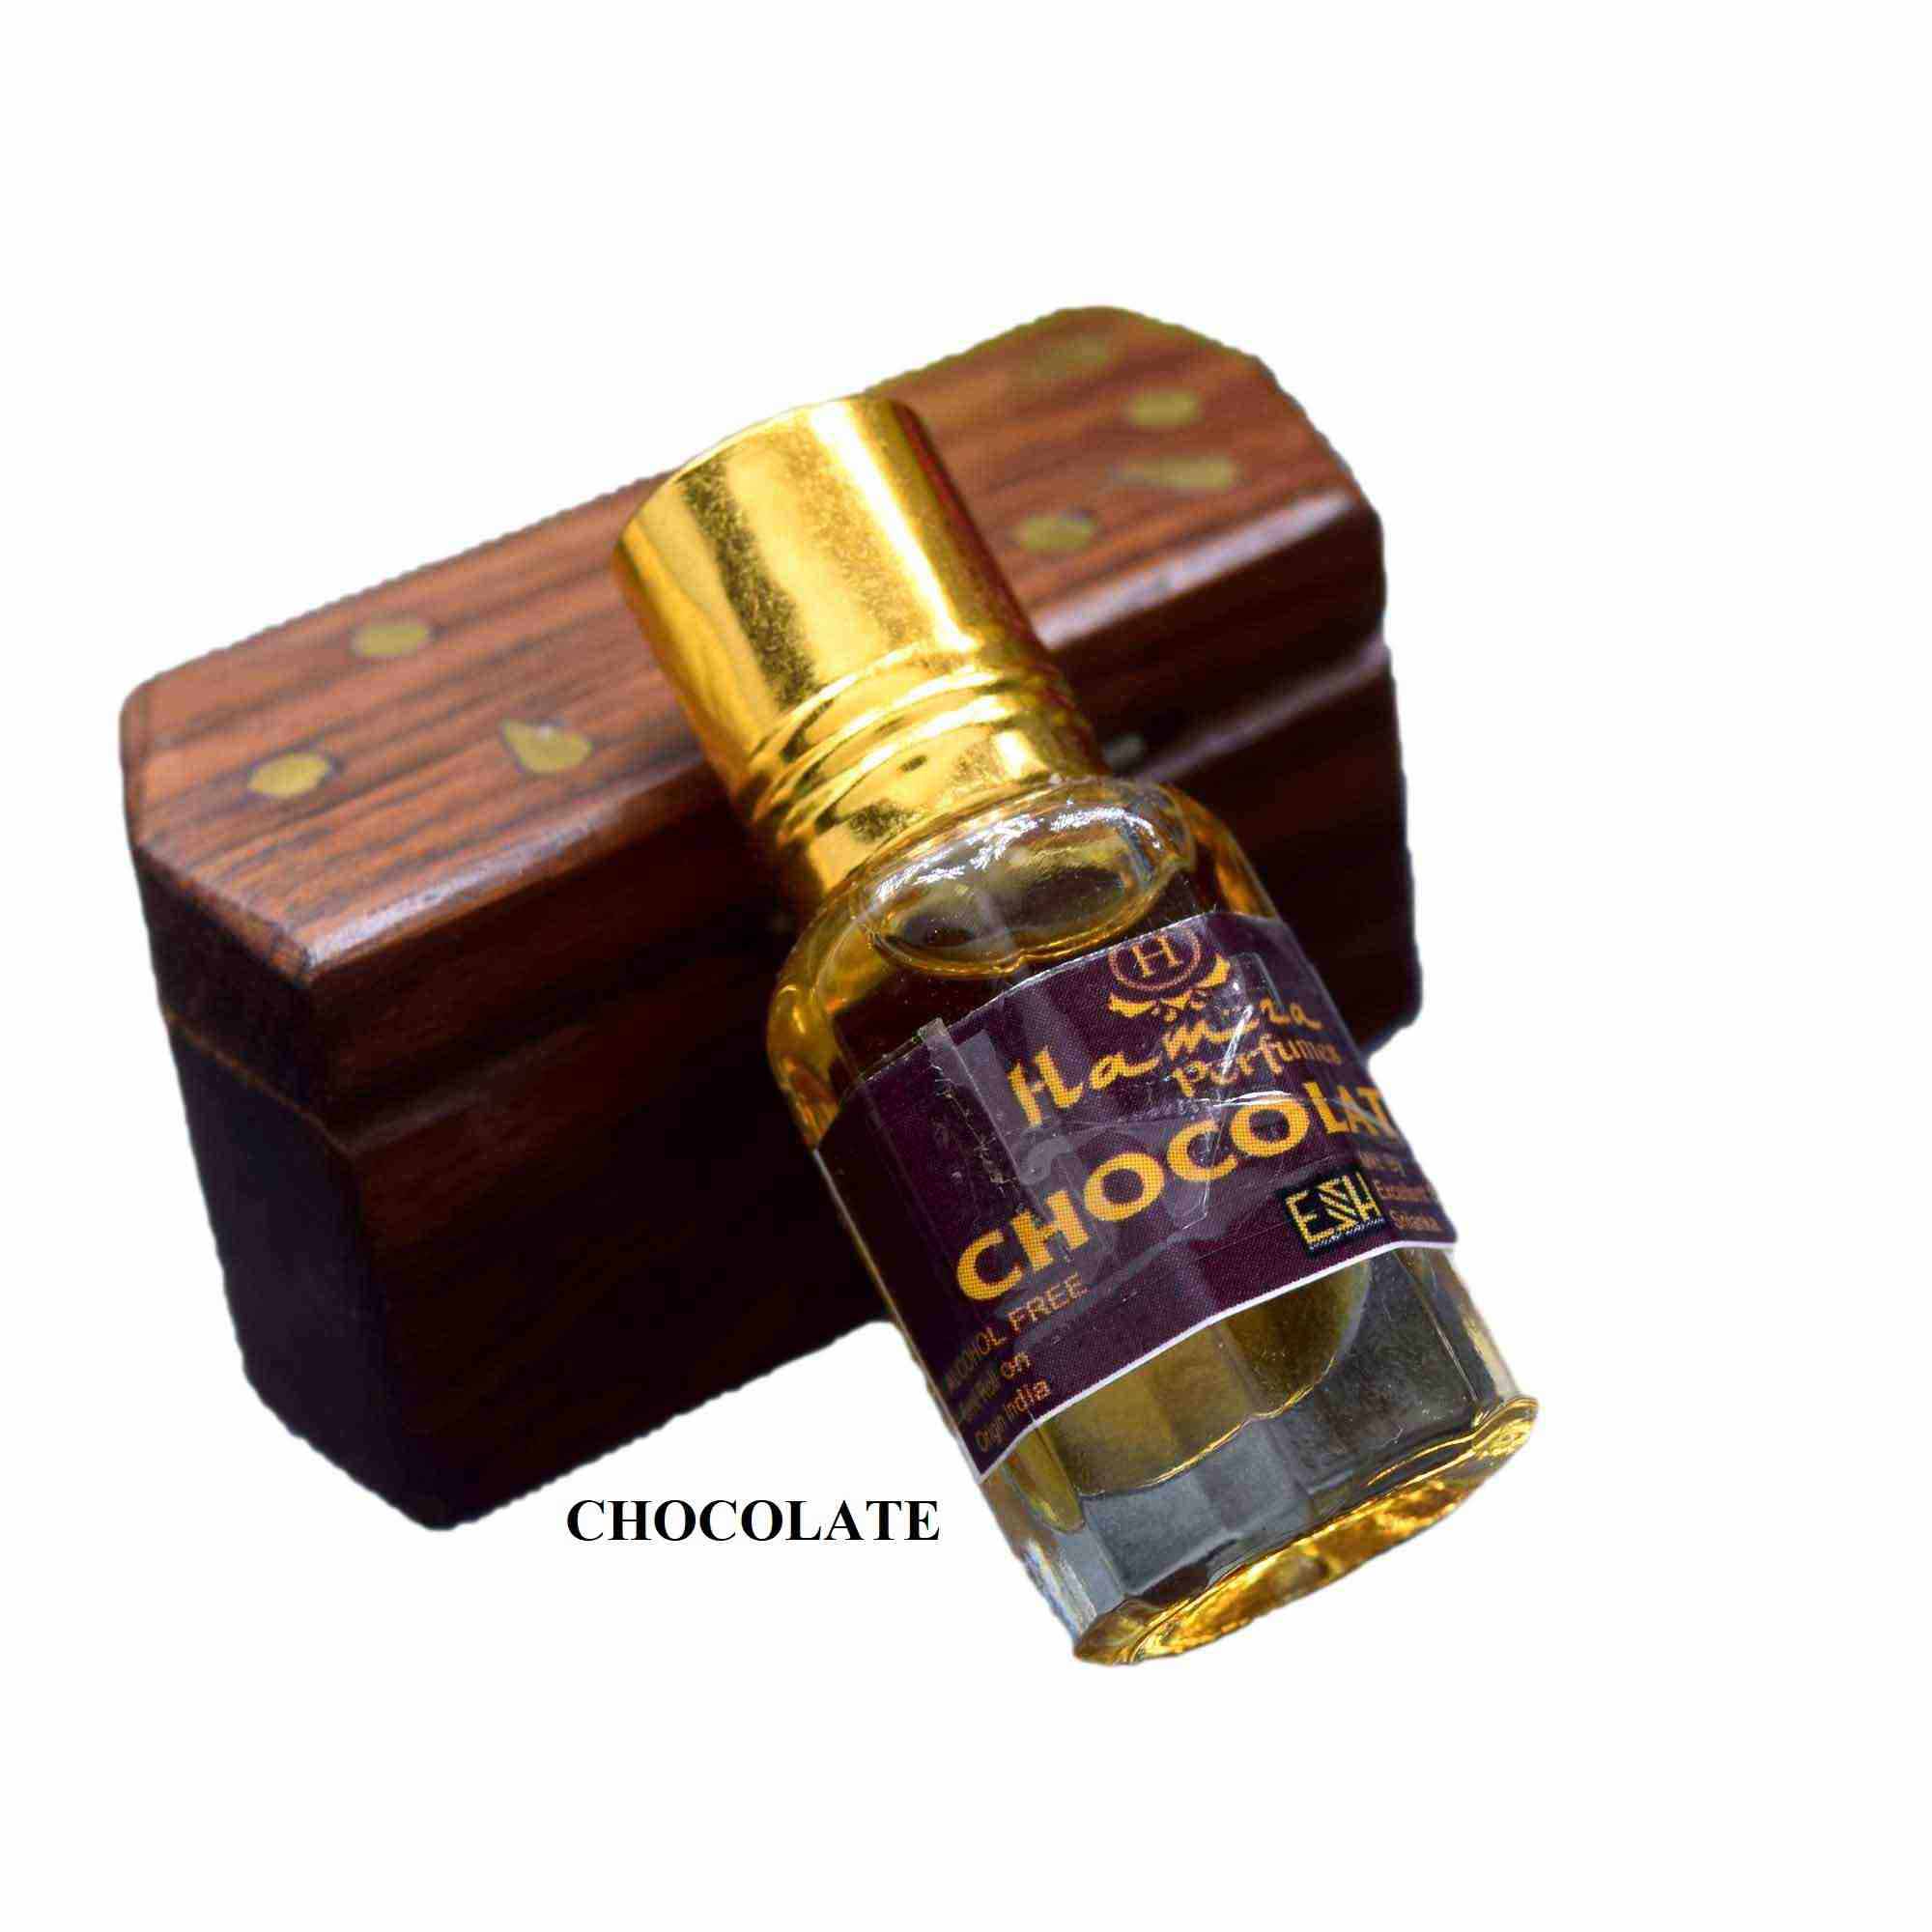 Chocolate flavor Attar For Men And Women Alcohol Free & Natural Vegan Cologne 6ml up to 13-14 hours on your clothes (NBLK) Unisex NowBuy.lk 4